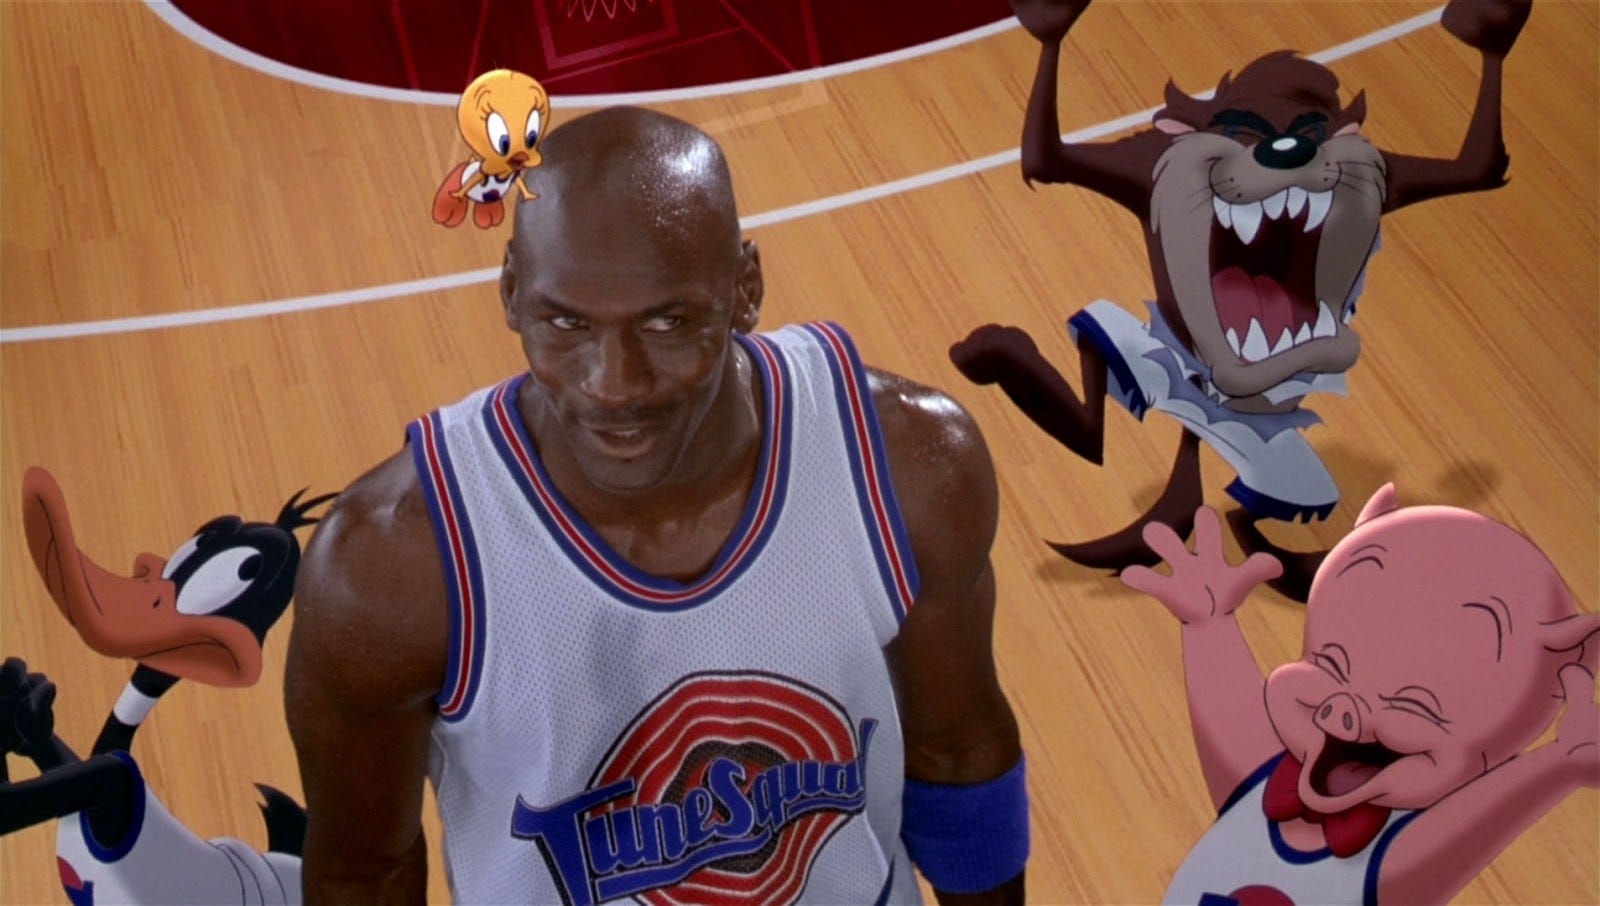 Michael Jordan shoots hoops while his animated friends hoot and holler in "Space Jam," which screens Friday night at the Orpheum.